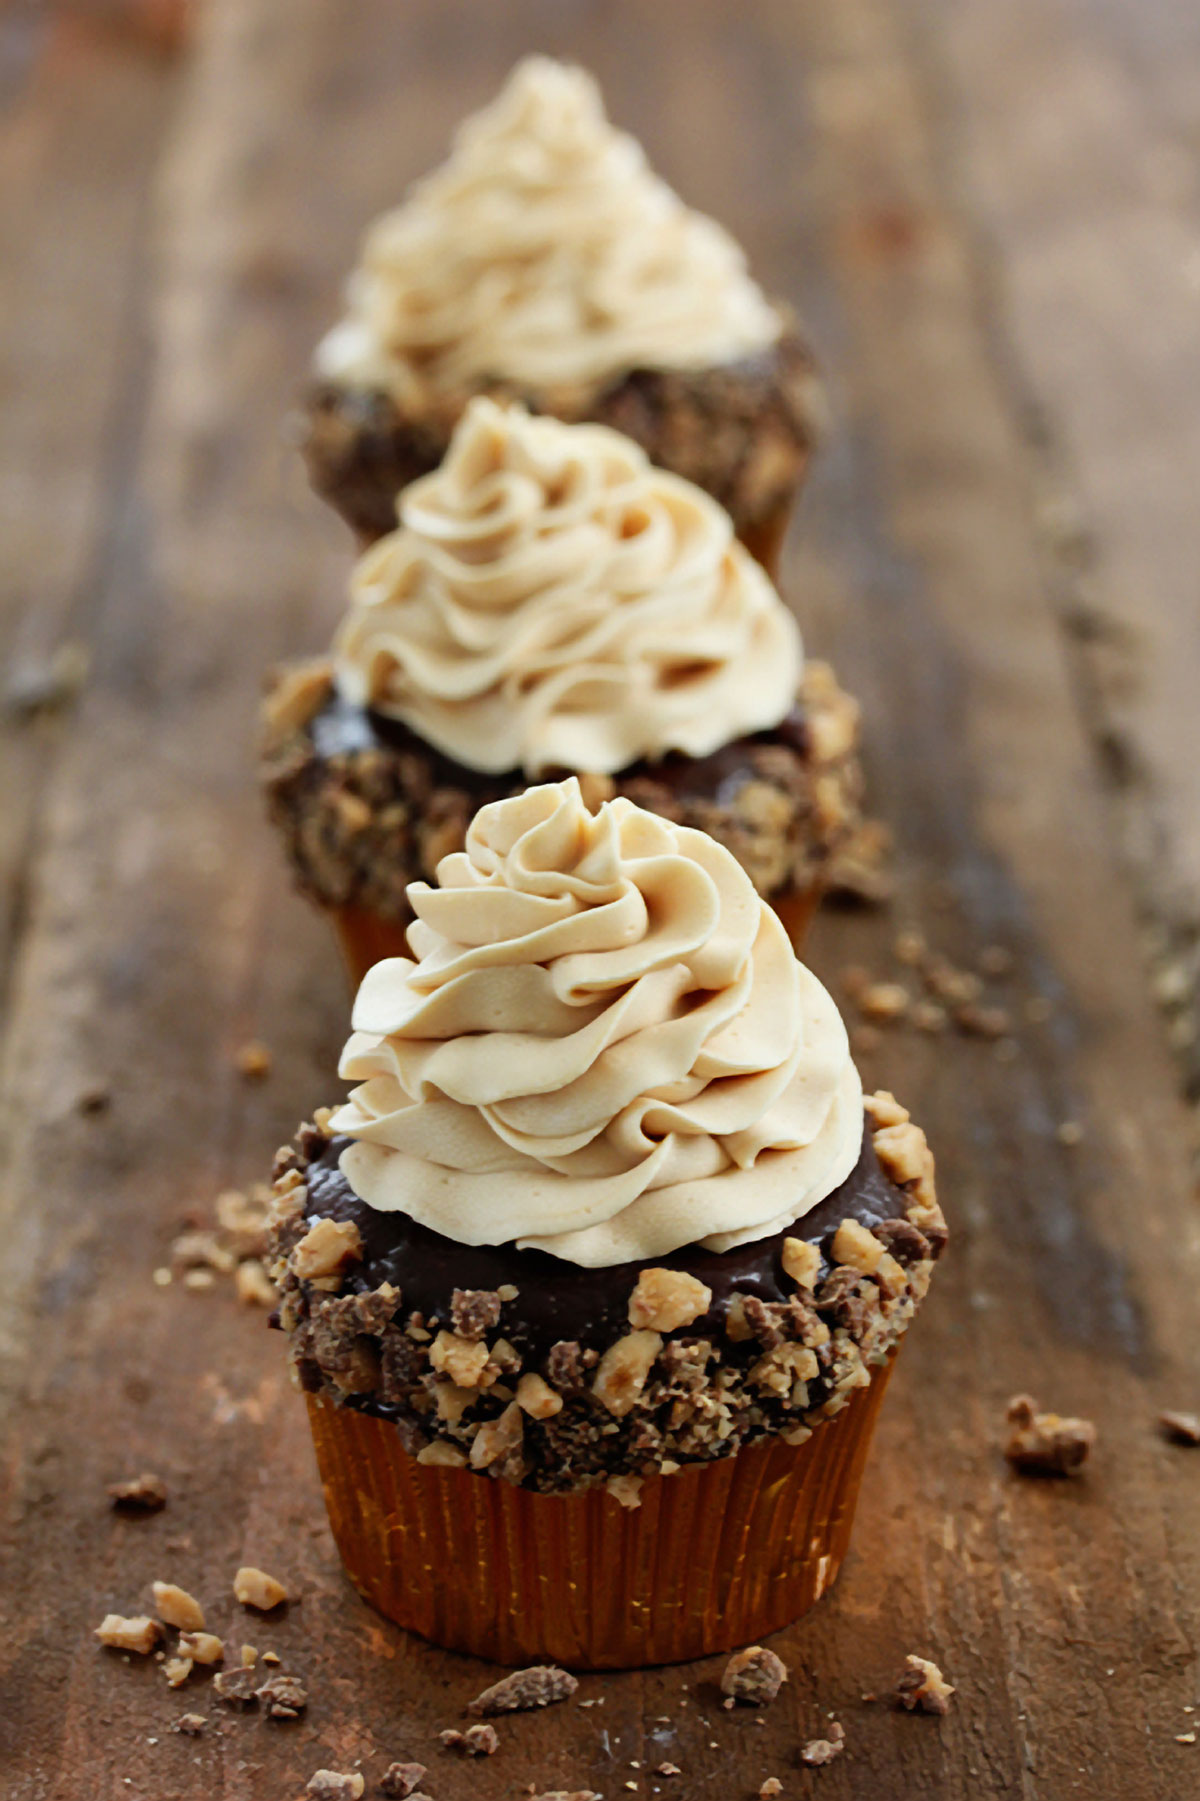 Toffee Crunch Cupcake with Caramel Frosting